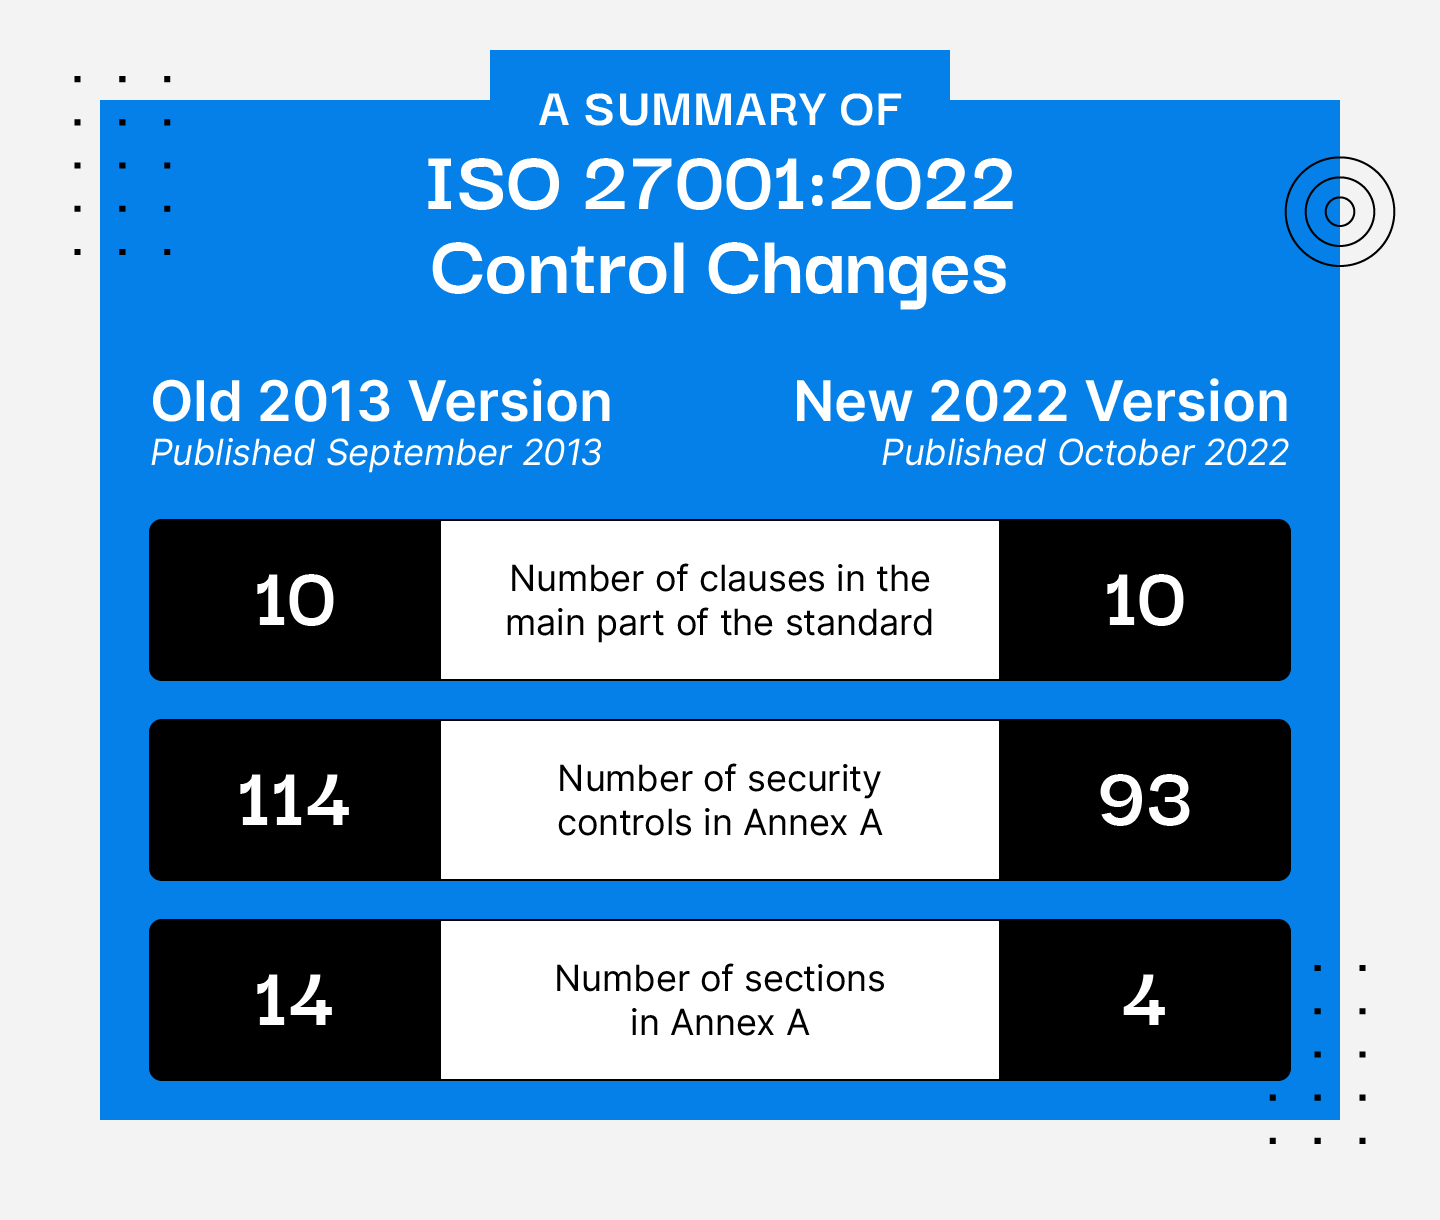 Summary of ISO 27001:2022 Control Changes